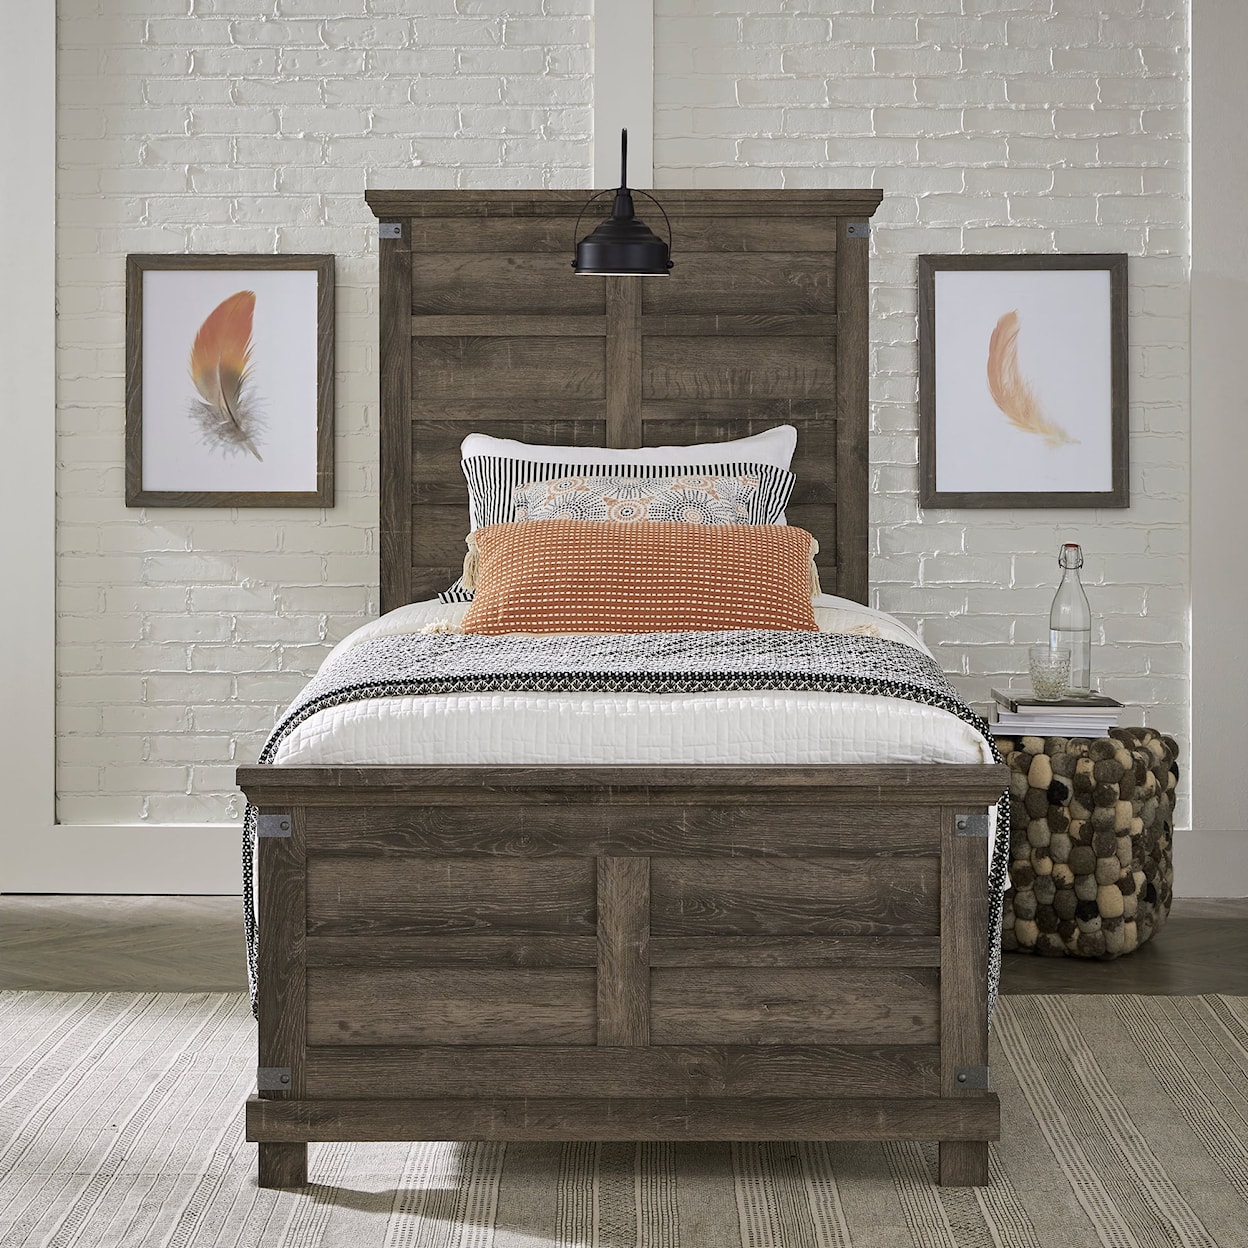 Libby Lakeside Haven 3-Piece Twin Bedroom Set